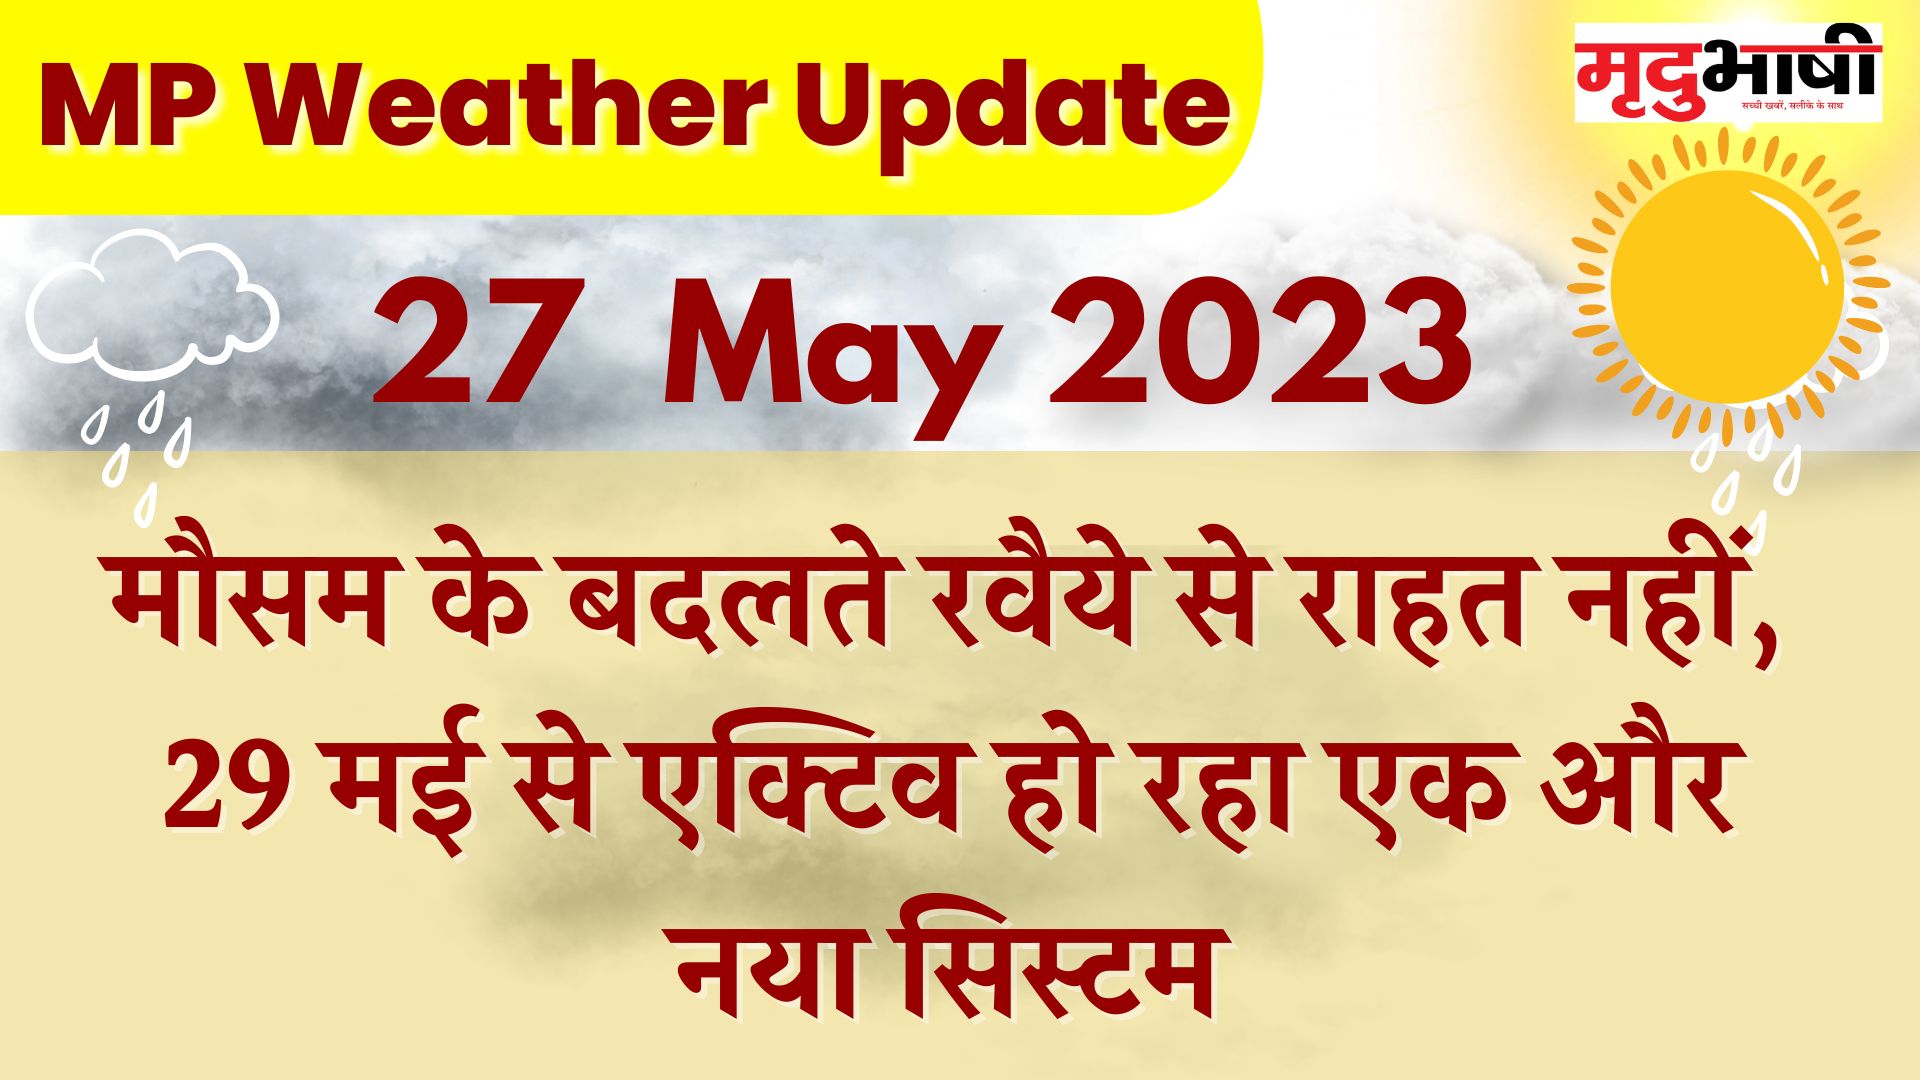 MP Weather Update 27 may 2023